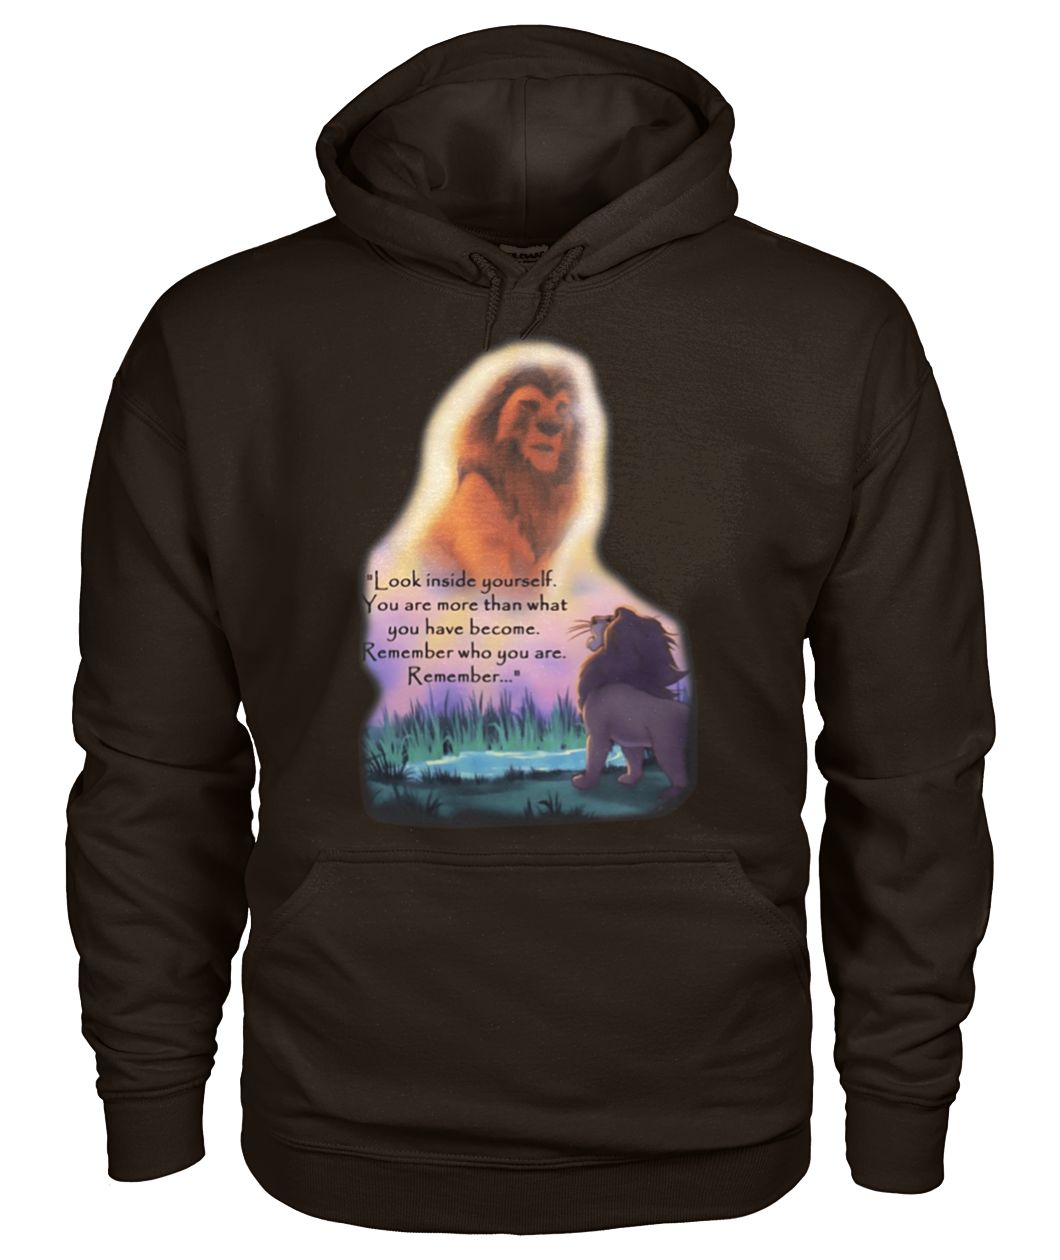 Look inside yourself you are more than what you have become the lion king gildan hoodie